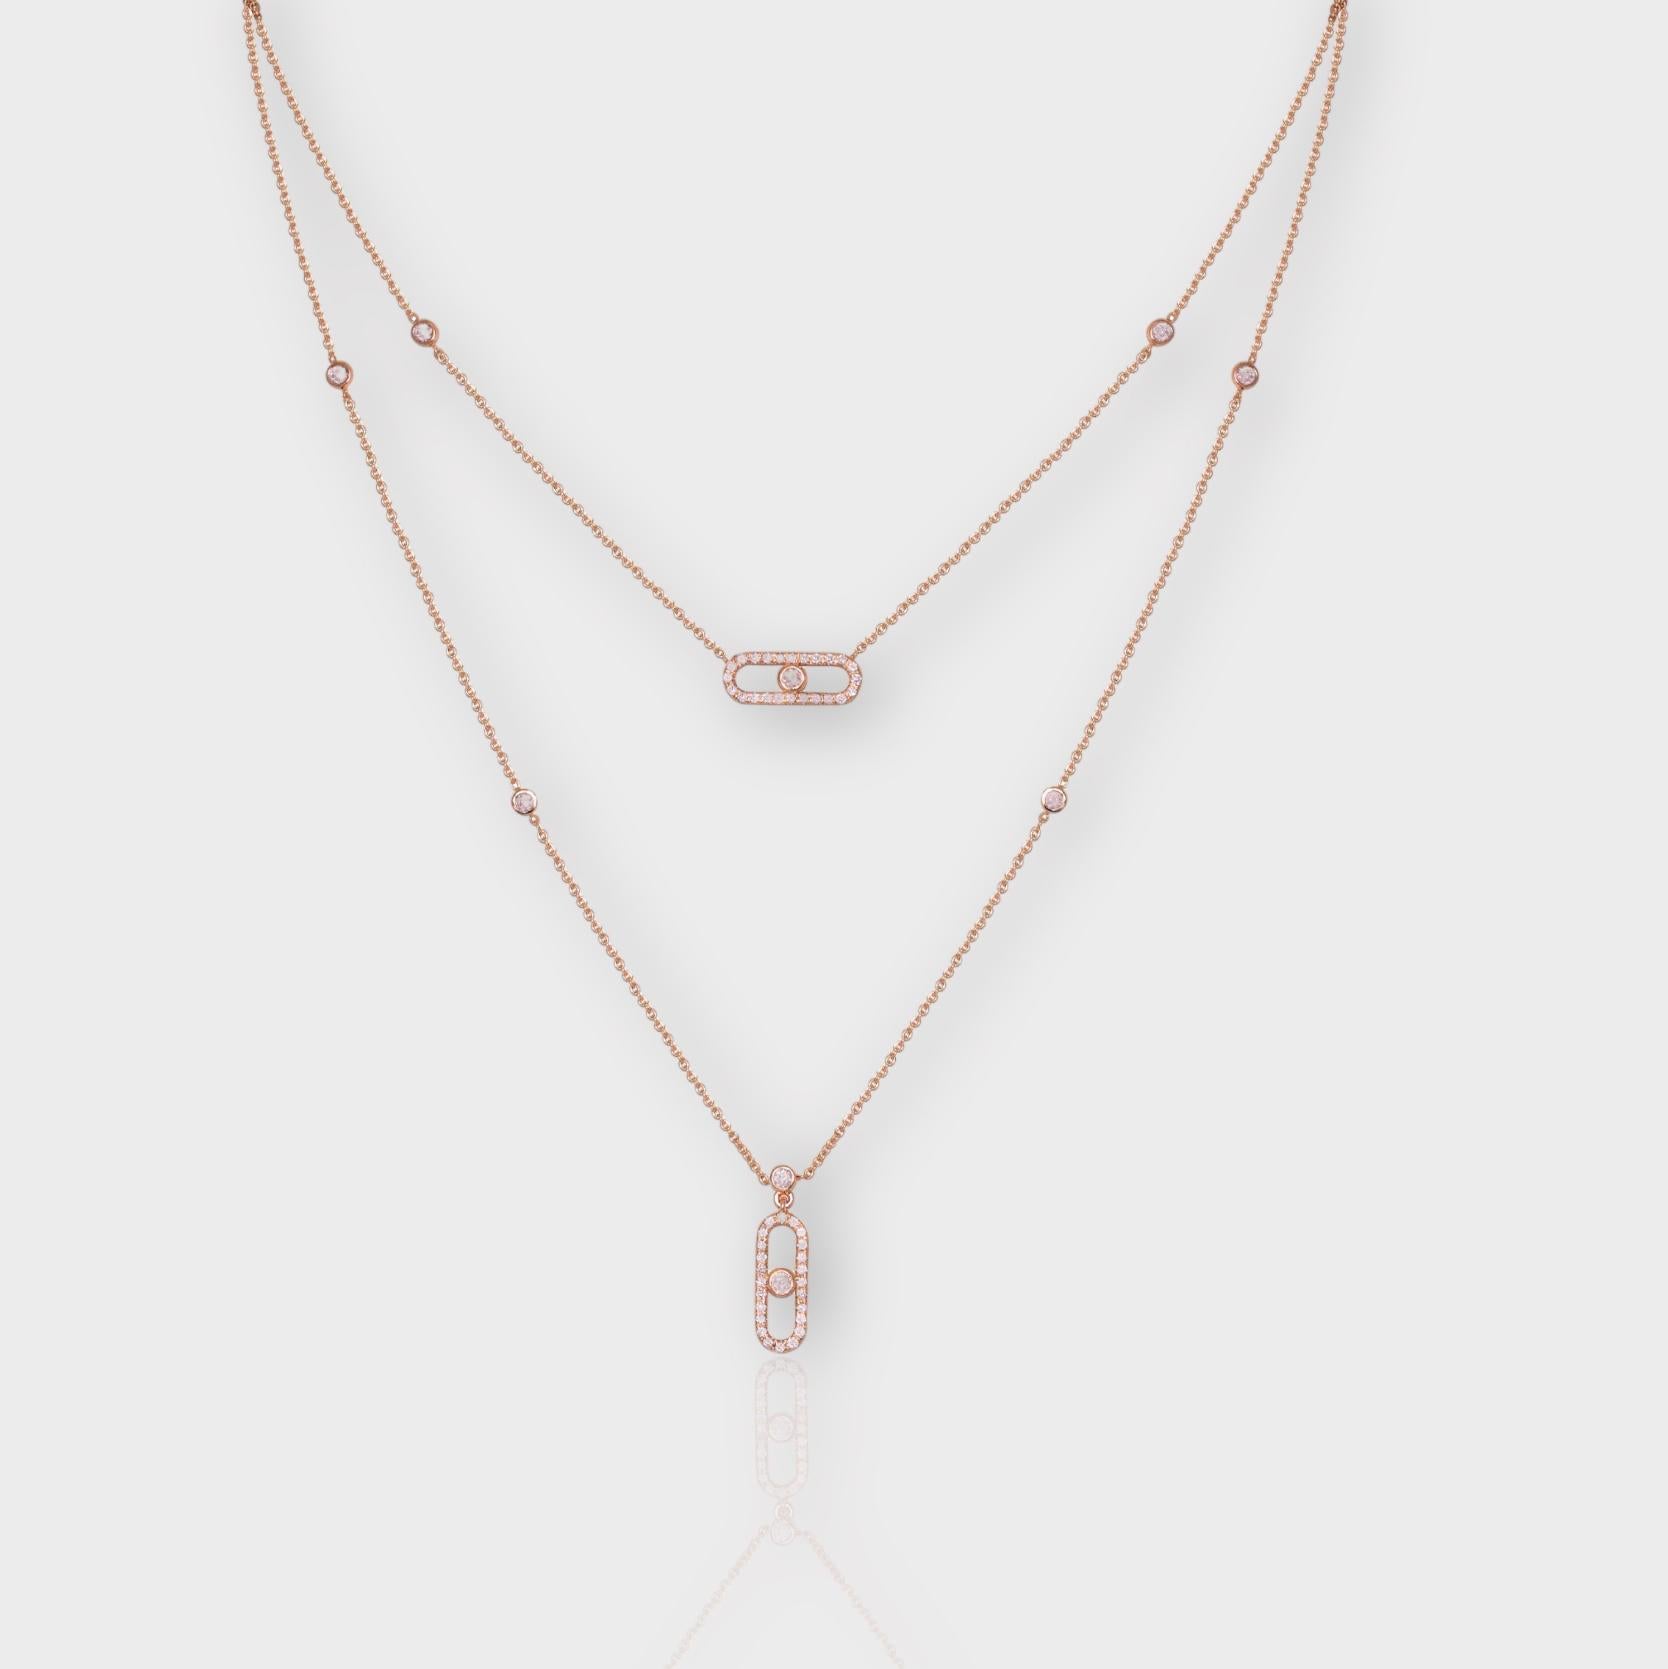 *IGI 14K 0.79 ct Natural Pink Diamonds  Art Deco Design Necklace*

This band features a stunning art deco design crafted from 14K pink gold. It is set with natural pink diamonds weighing 0.79 carats.

This necklace features colorful natural diamonds